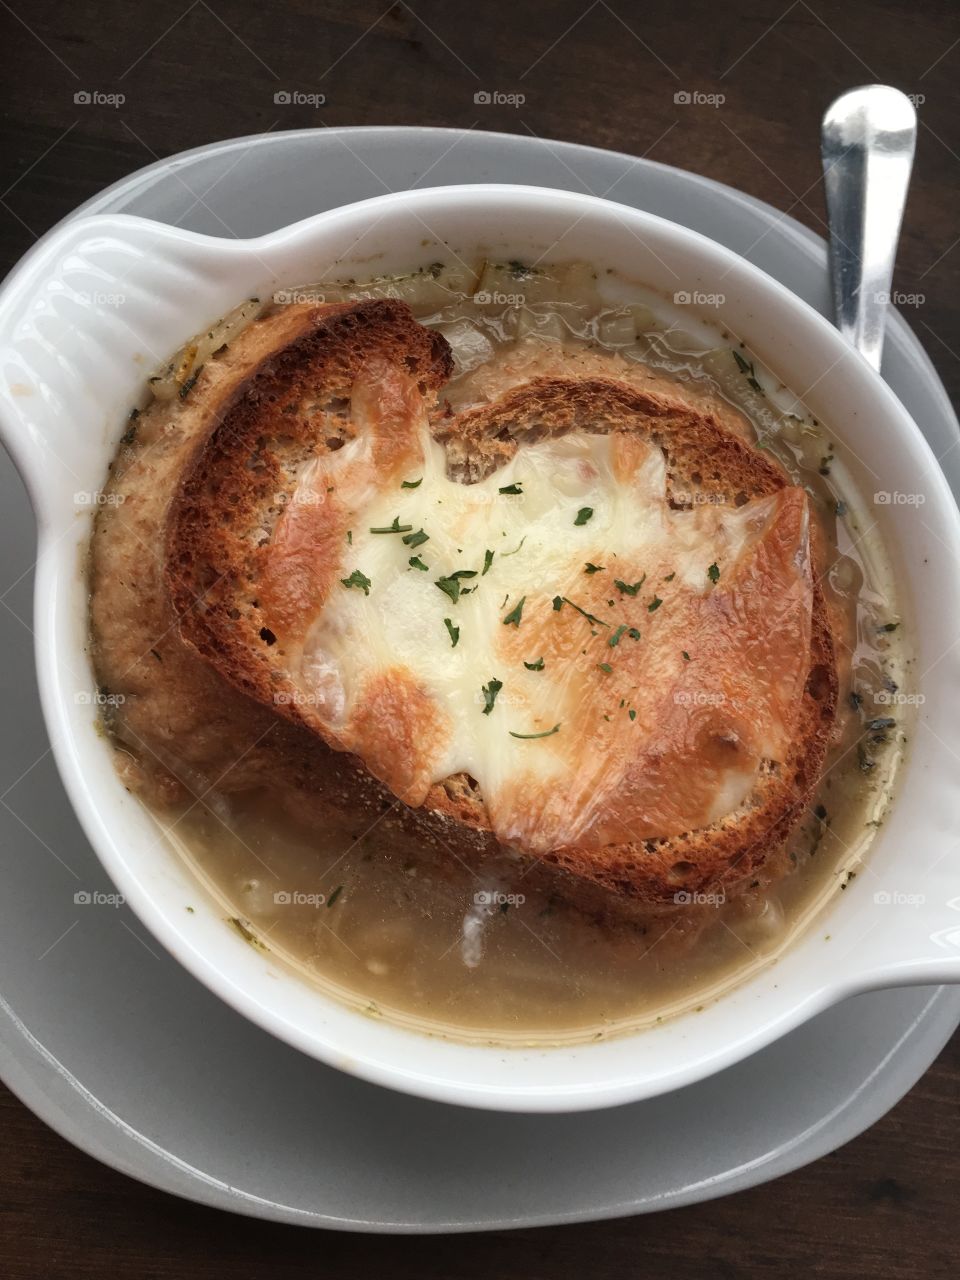 Home made French onion soup in our new soup bowls. Great autumn and winter dish. Hearty and delicious. The crouton is made out of day old bakery bread. The secret ingredient flavour you would never guess is Italian seasoning.  Great wood background. 